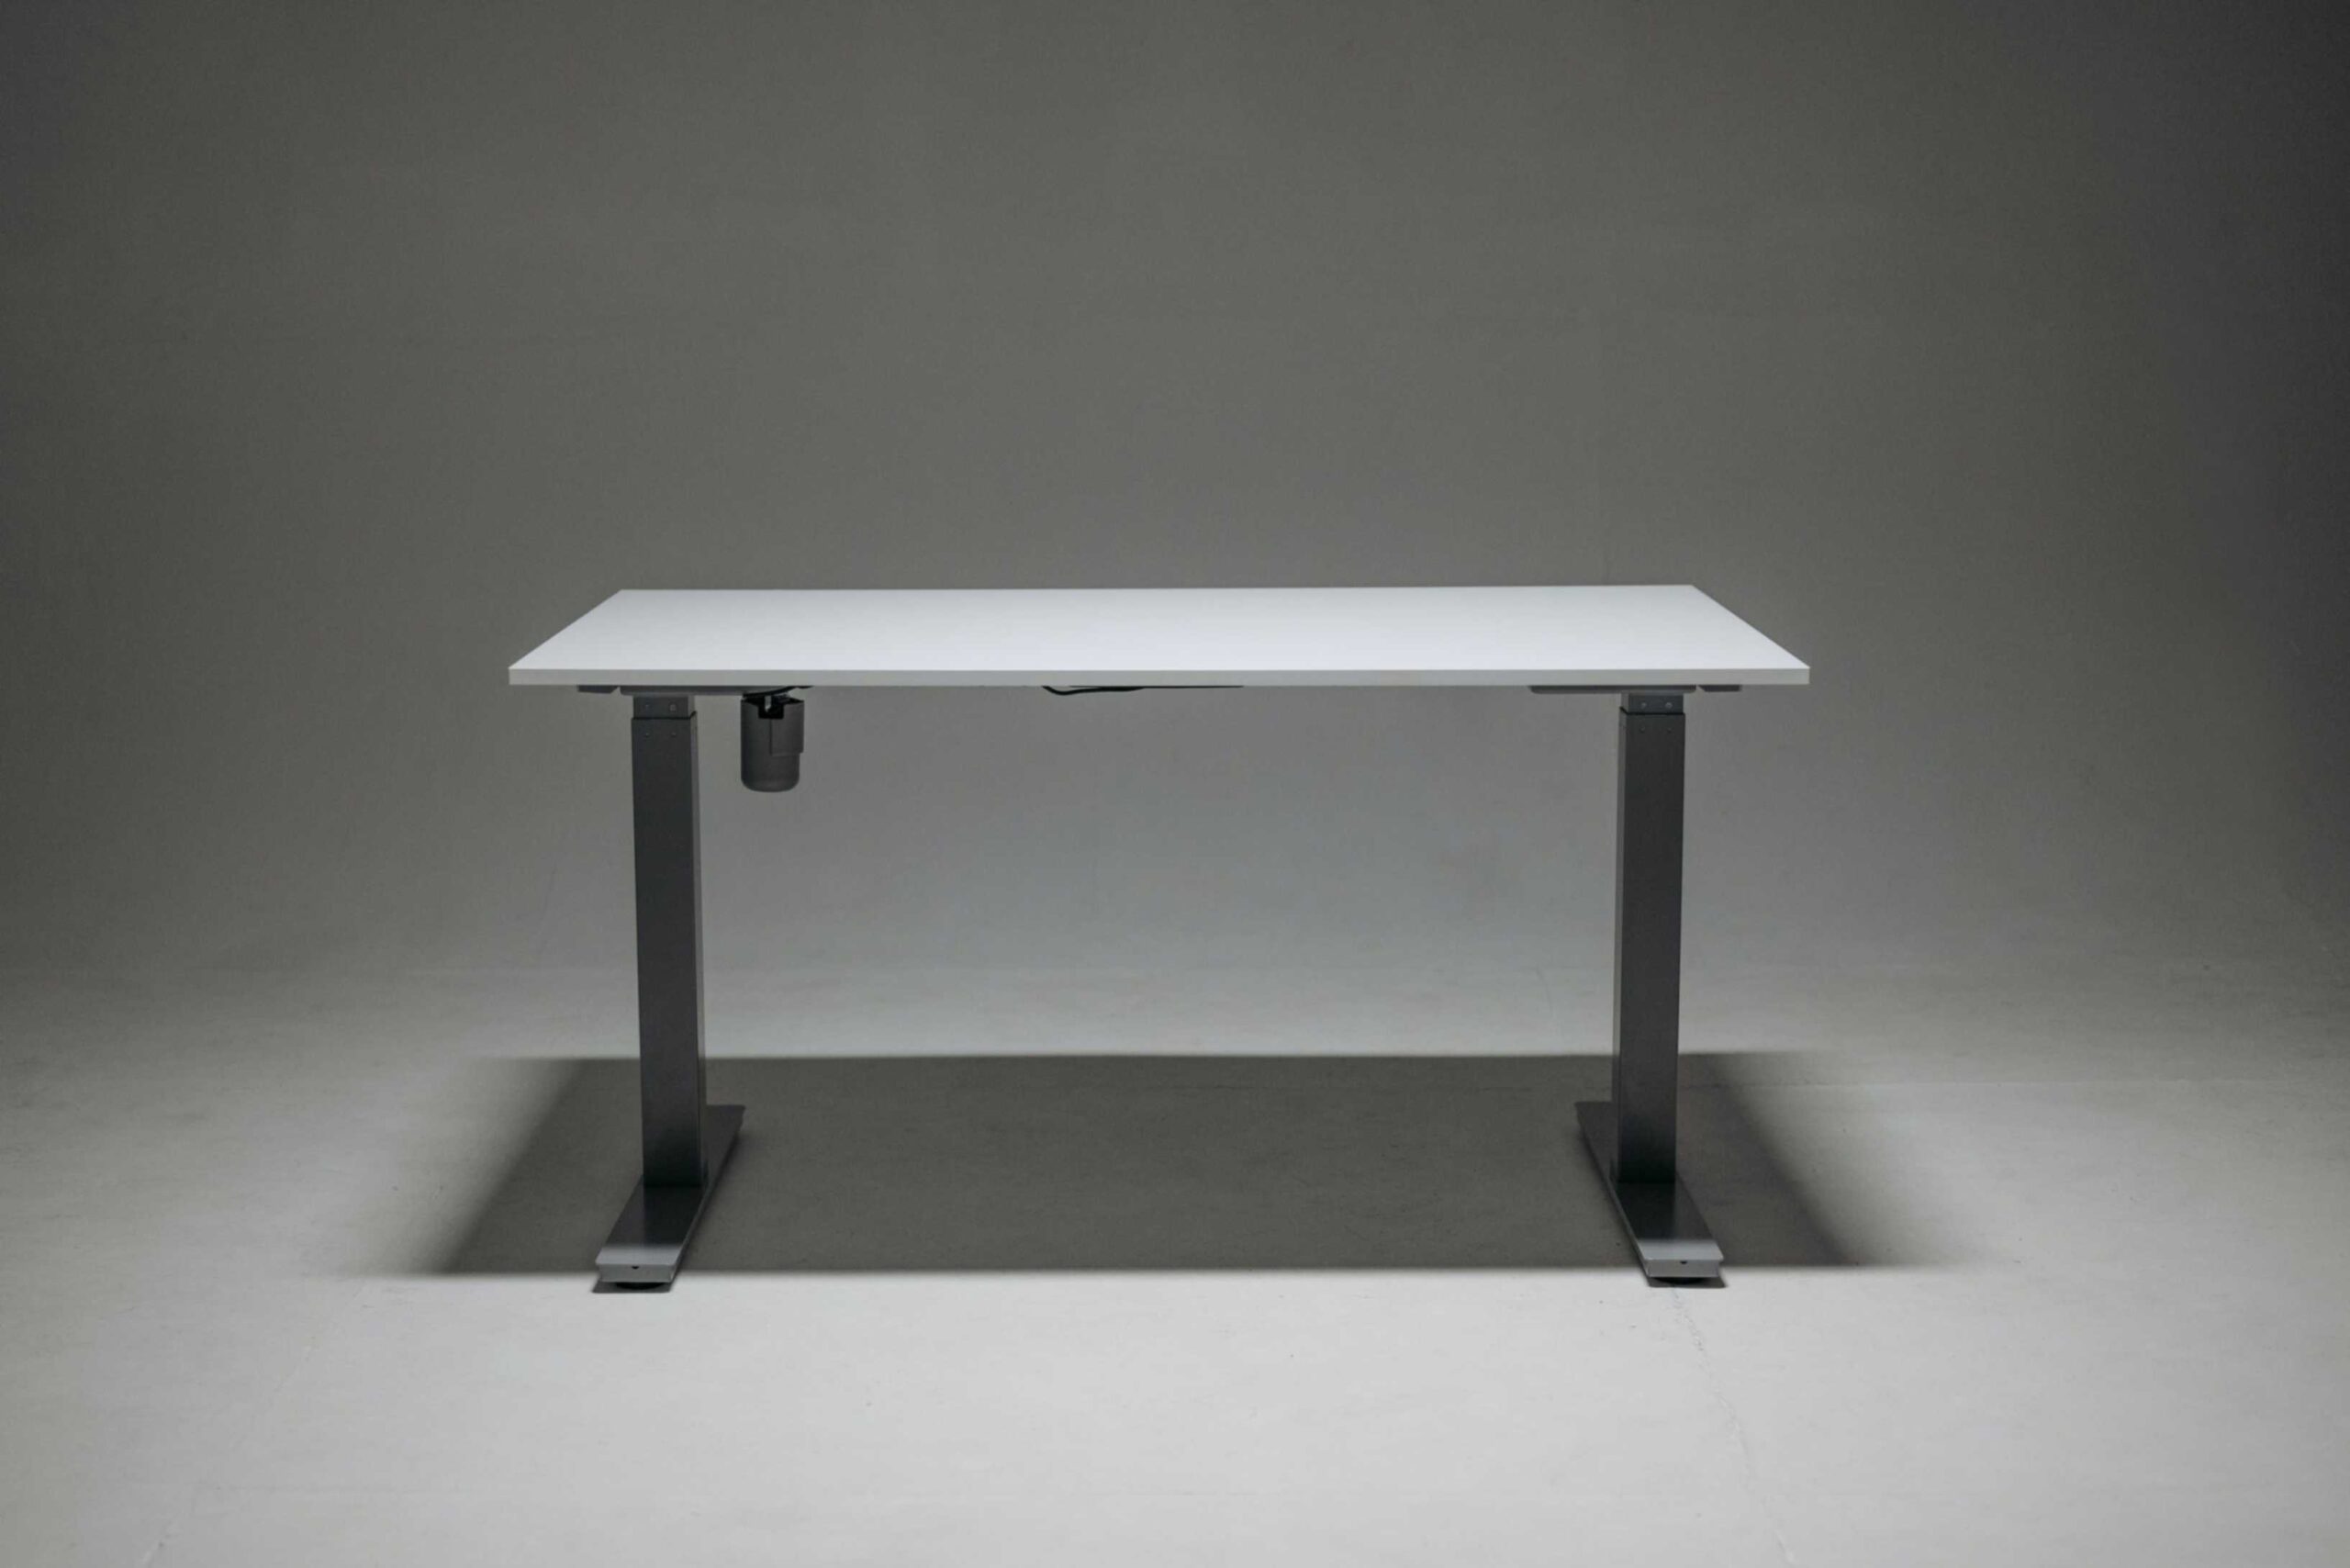 Now it’s high time to take a STAND. “SIT STAND DESK” your new working space.